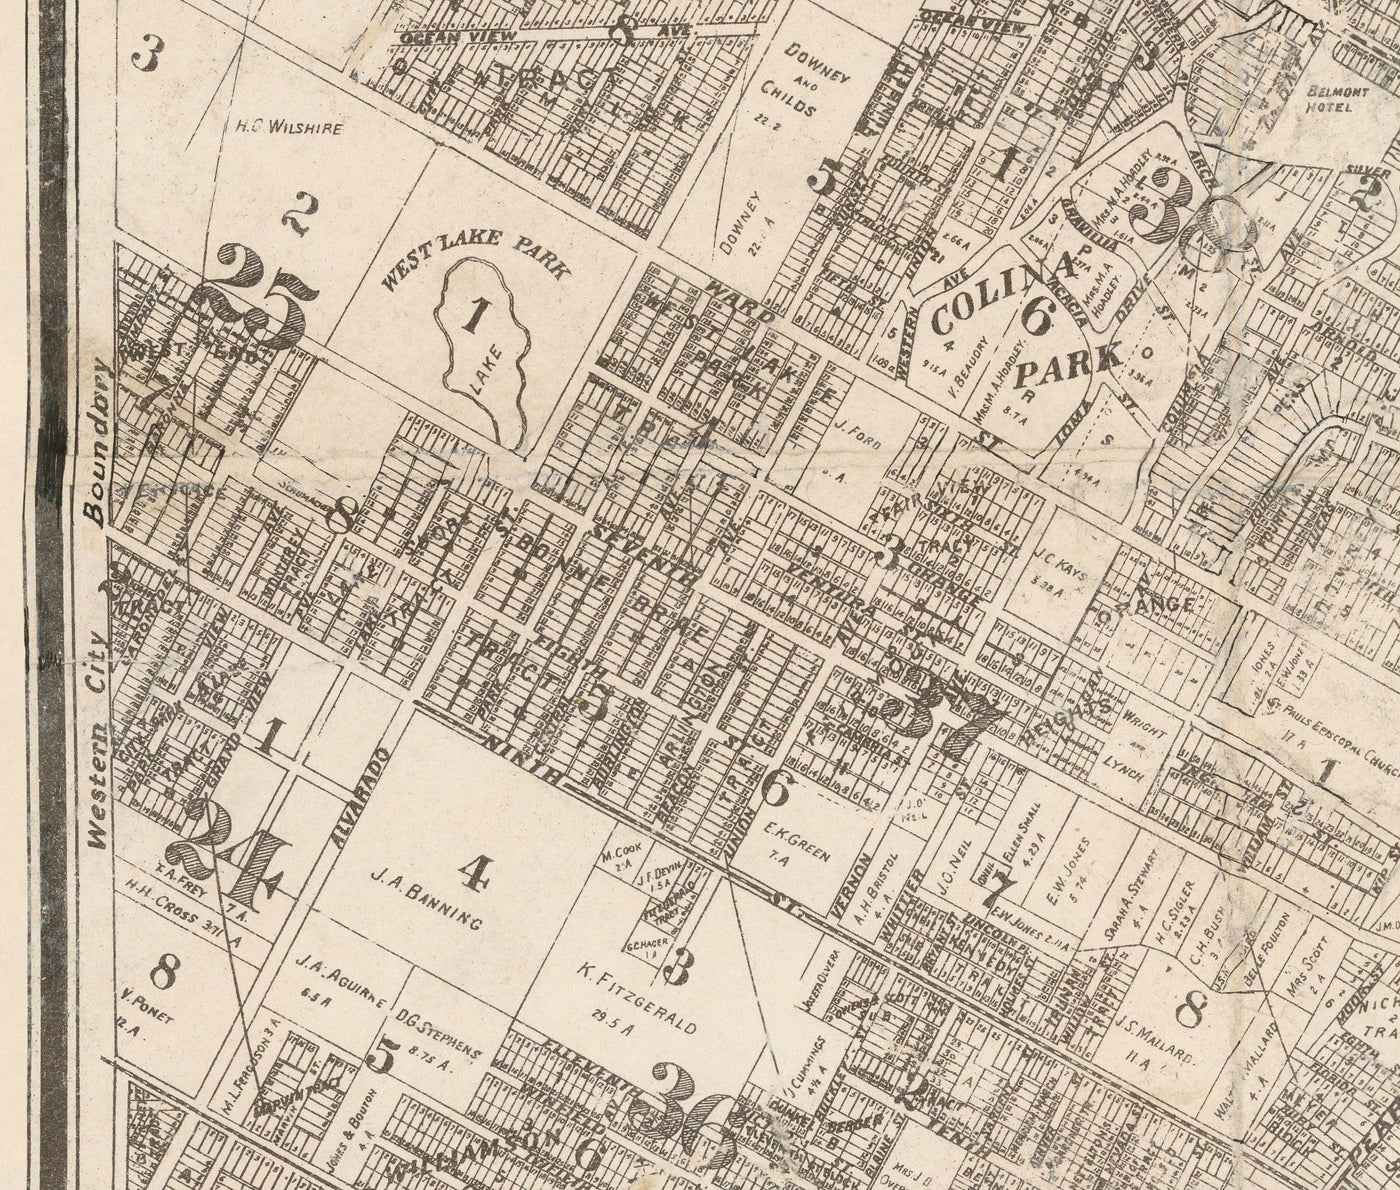 Old Map of Los Angeles, 1887 - Rare City Chart - Downtown, Chinatown, Financial District, Skid Row, Fashion District